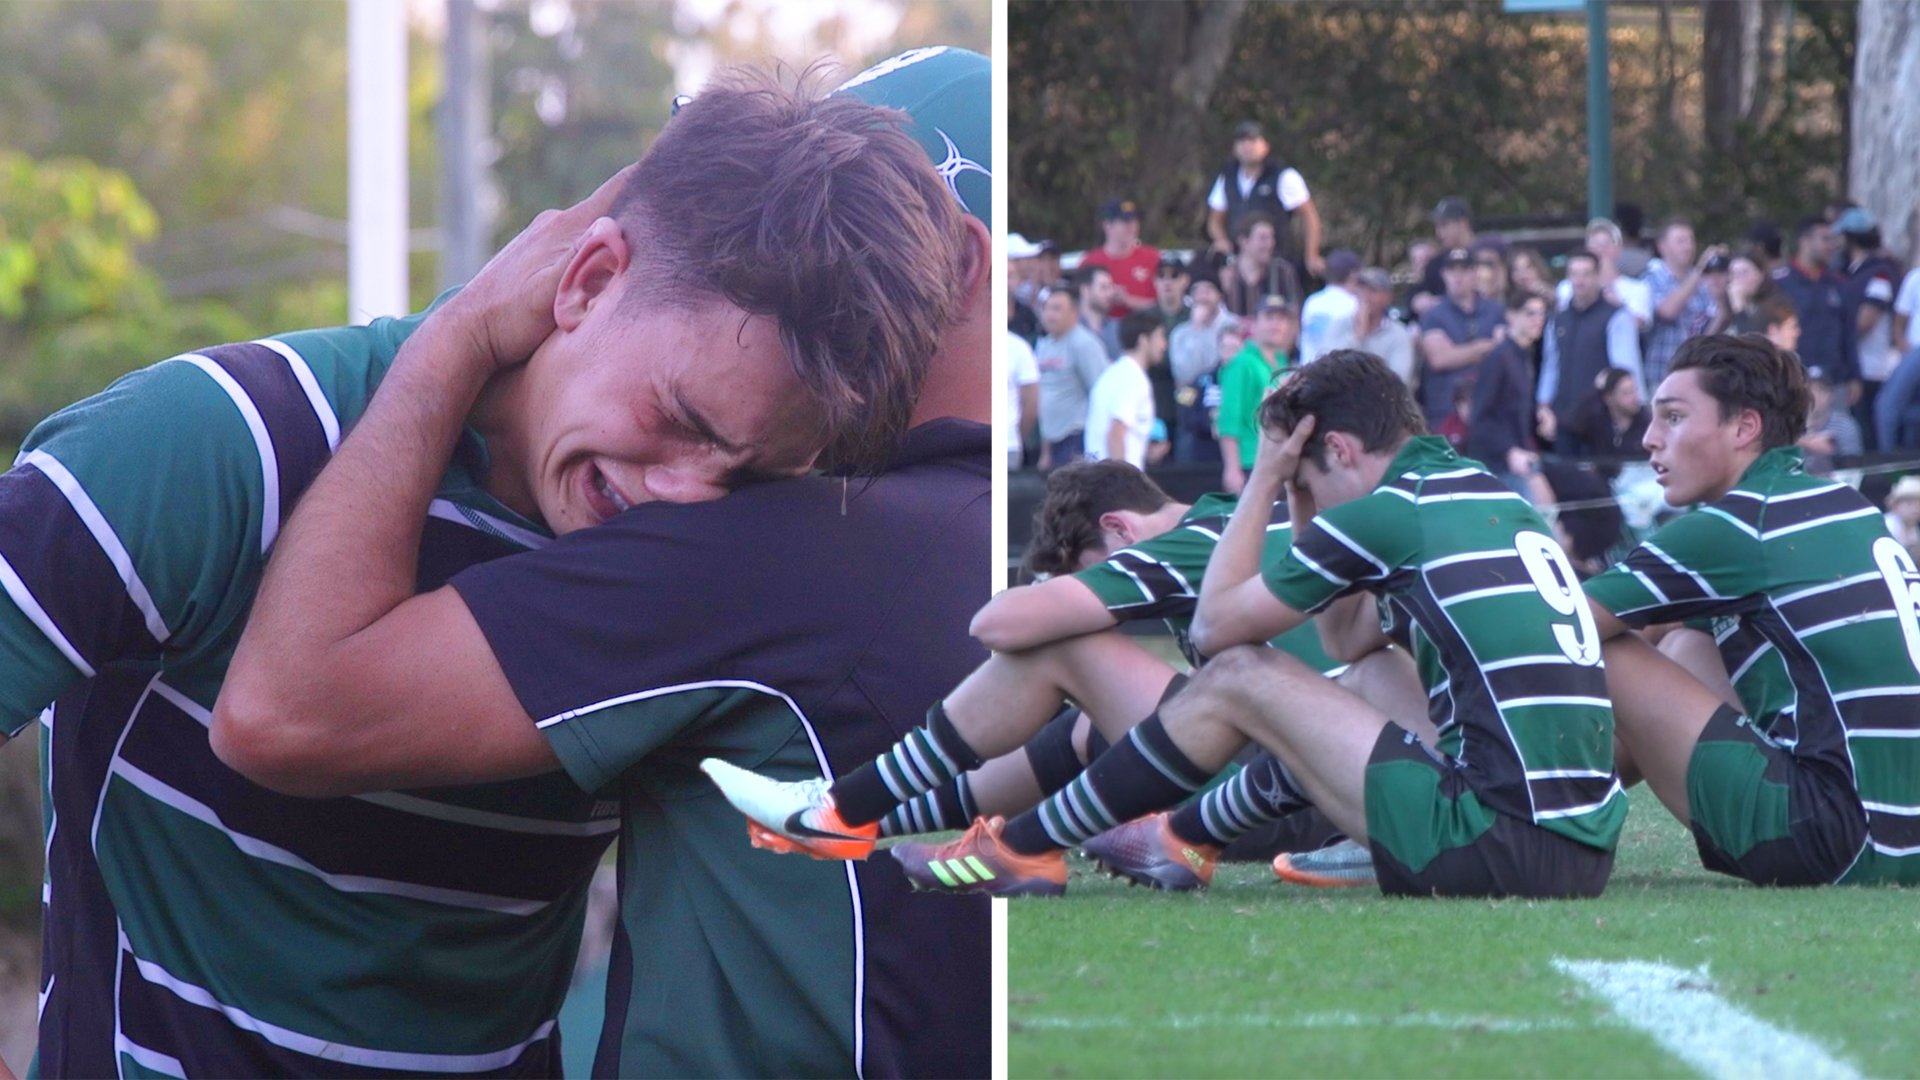 A video of an Australian rugby school losing their final match is going viral online